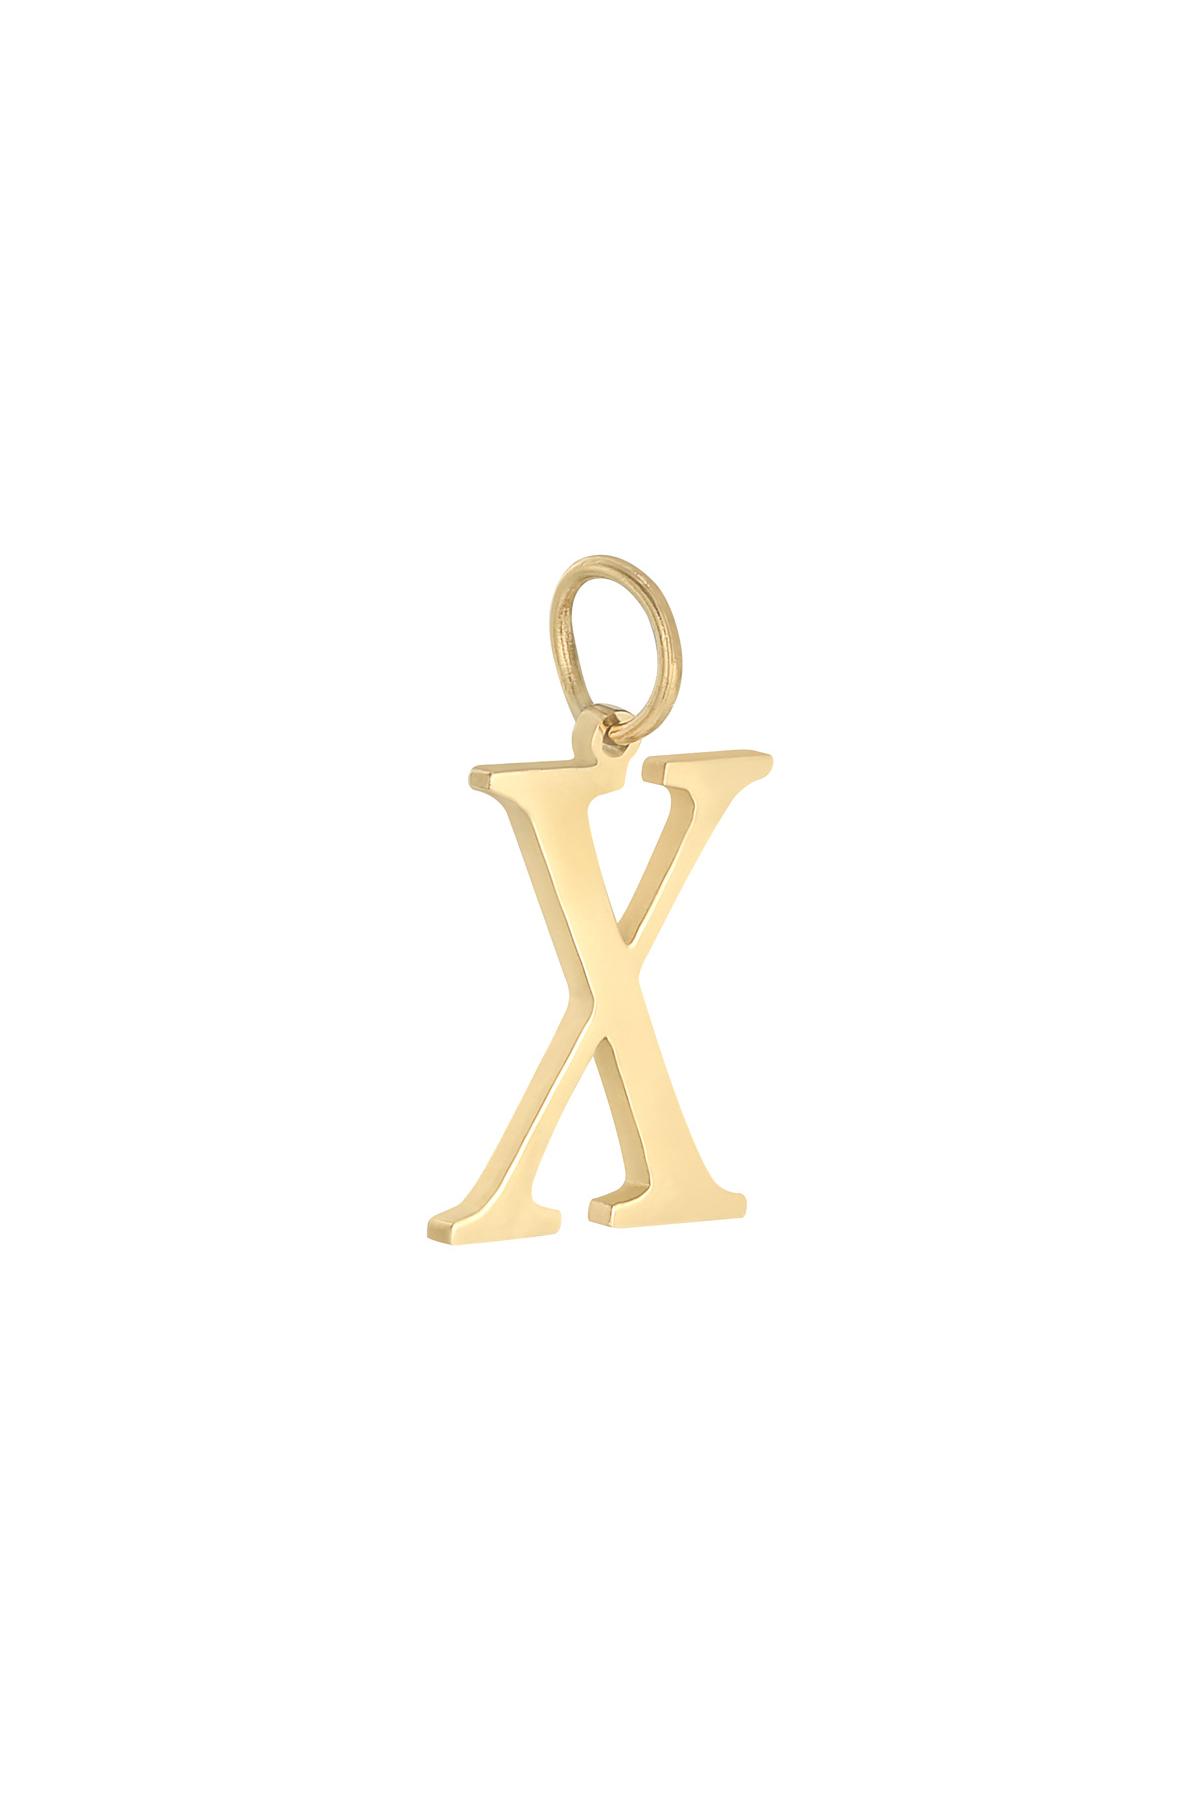 Gold / Charm X Gold Stainless Steel Immagine33